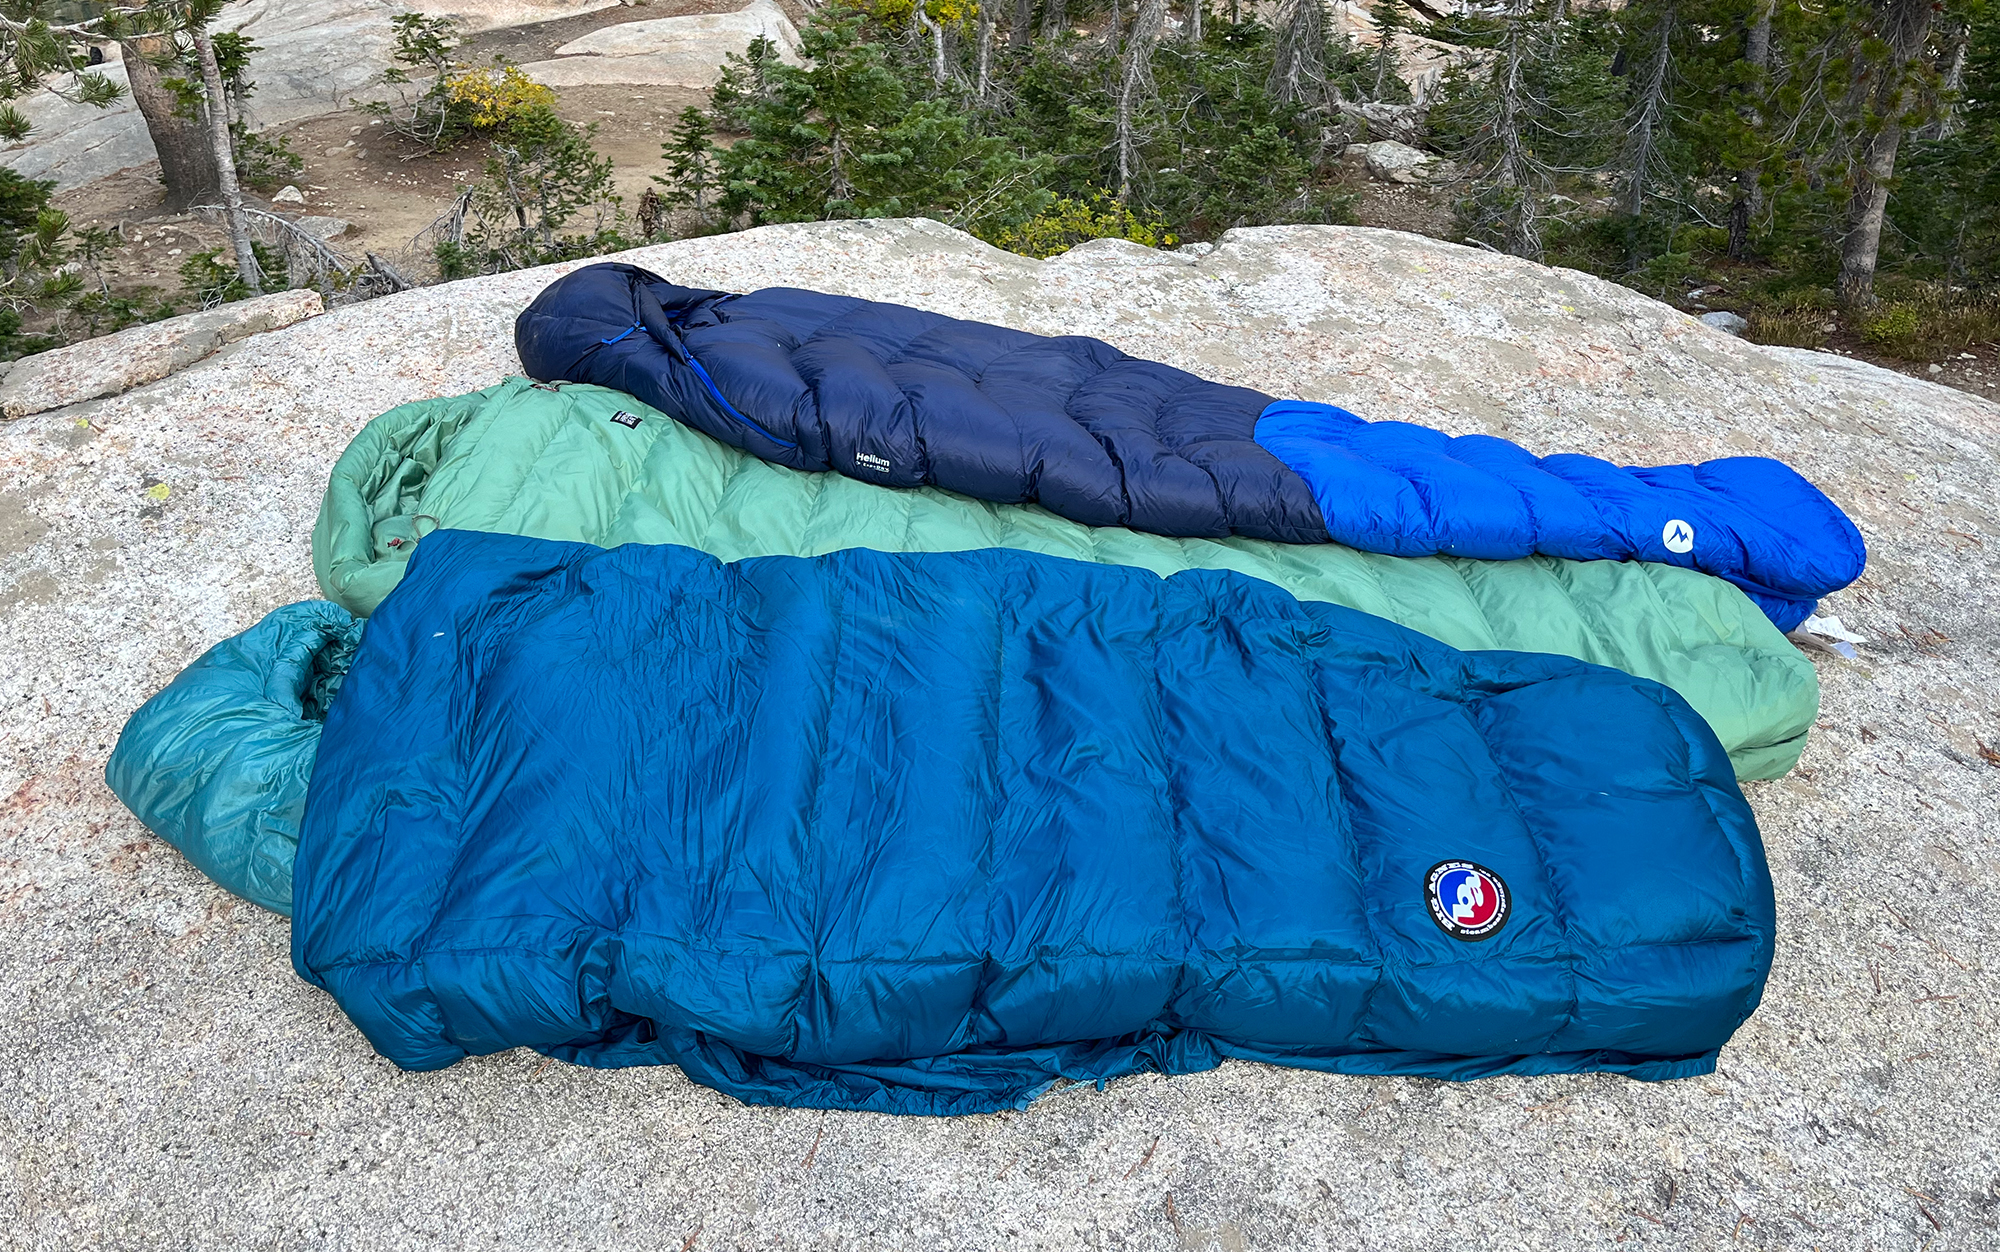 Three of the best sleeping bags lay on a rock.